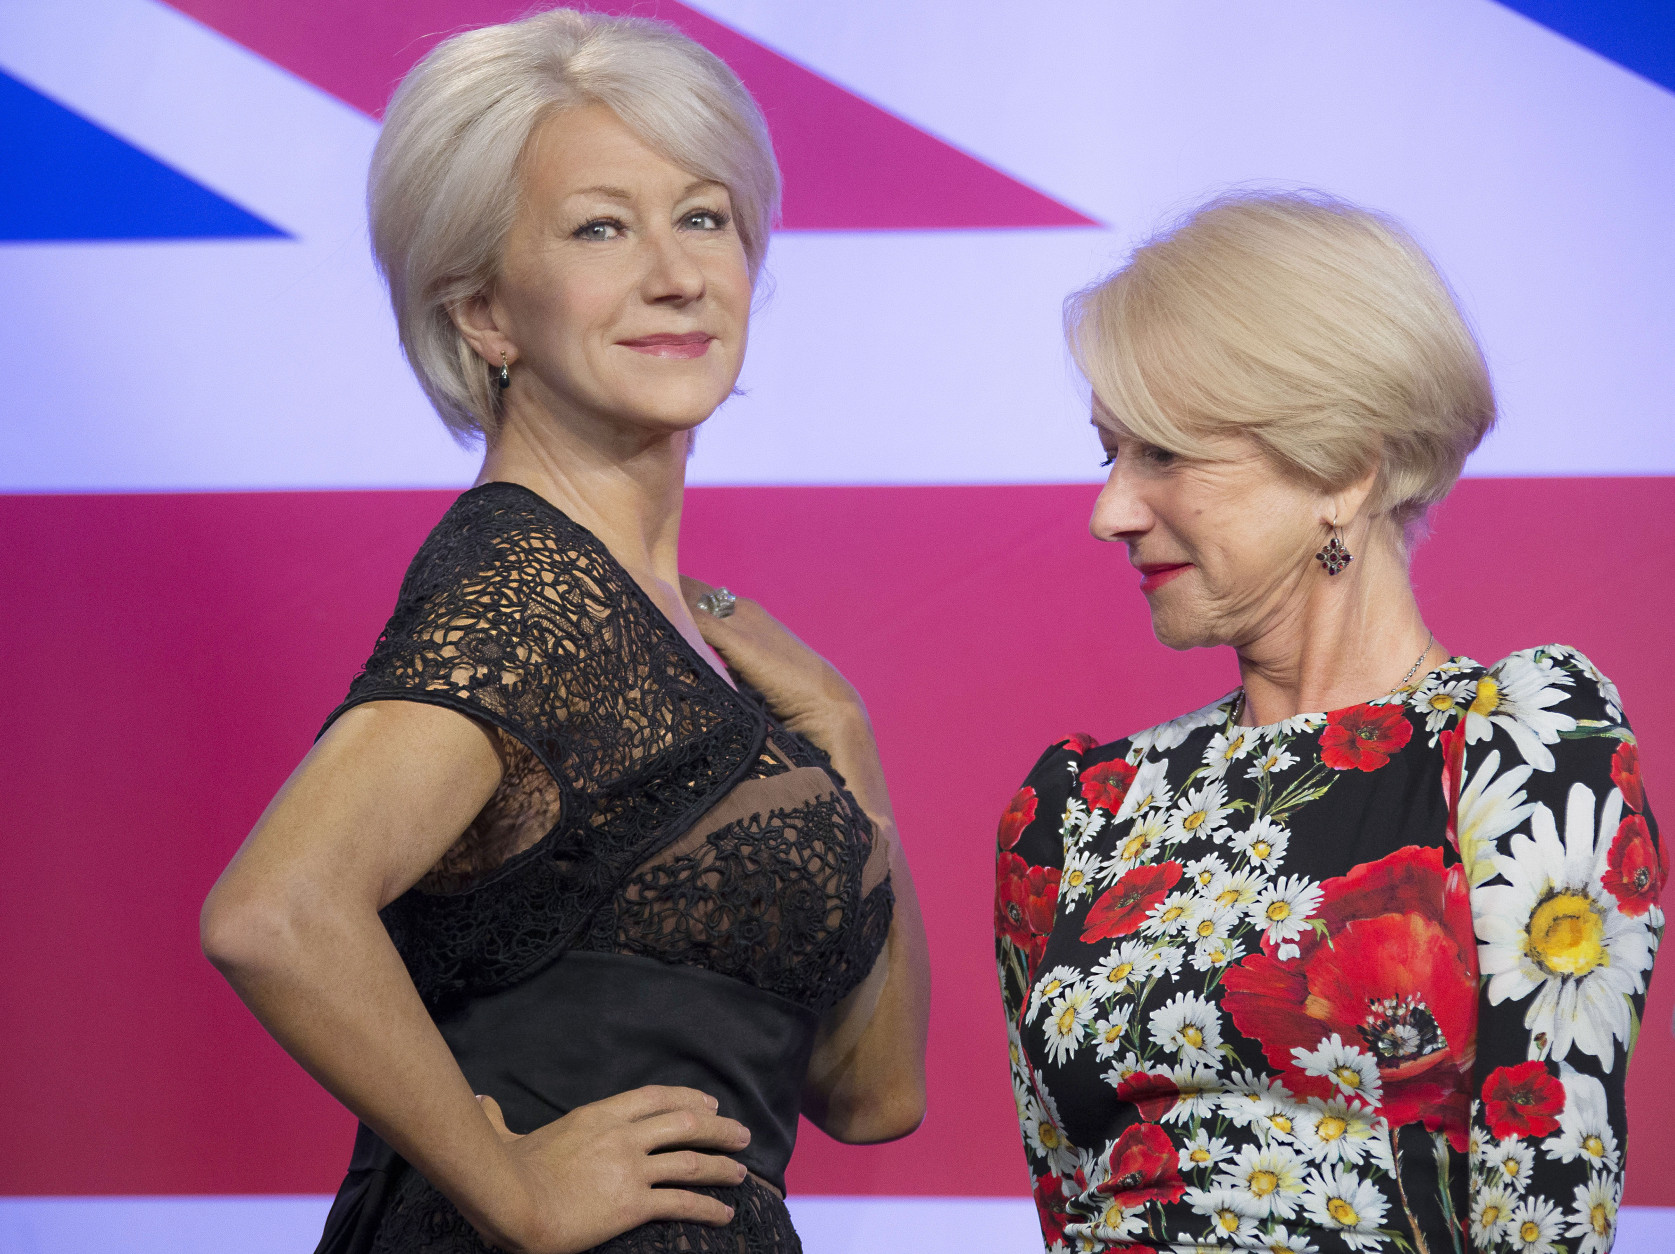 British actress Helen Mirren looks at one of three wax figures of herself, made in celebration of her recent 70th birthday, at Madame Tussauds in central London, Thursday, July 30, 2015. (Photo by Joel Ryan/Invision/AP)